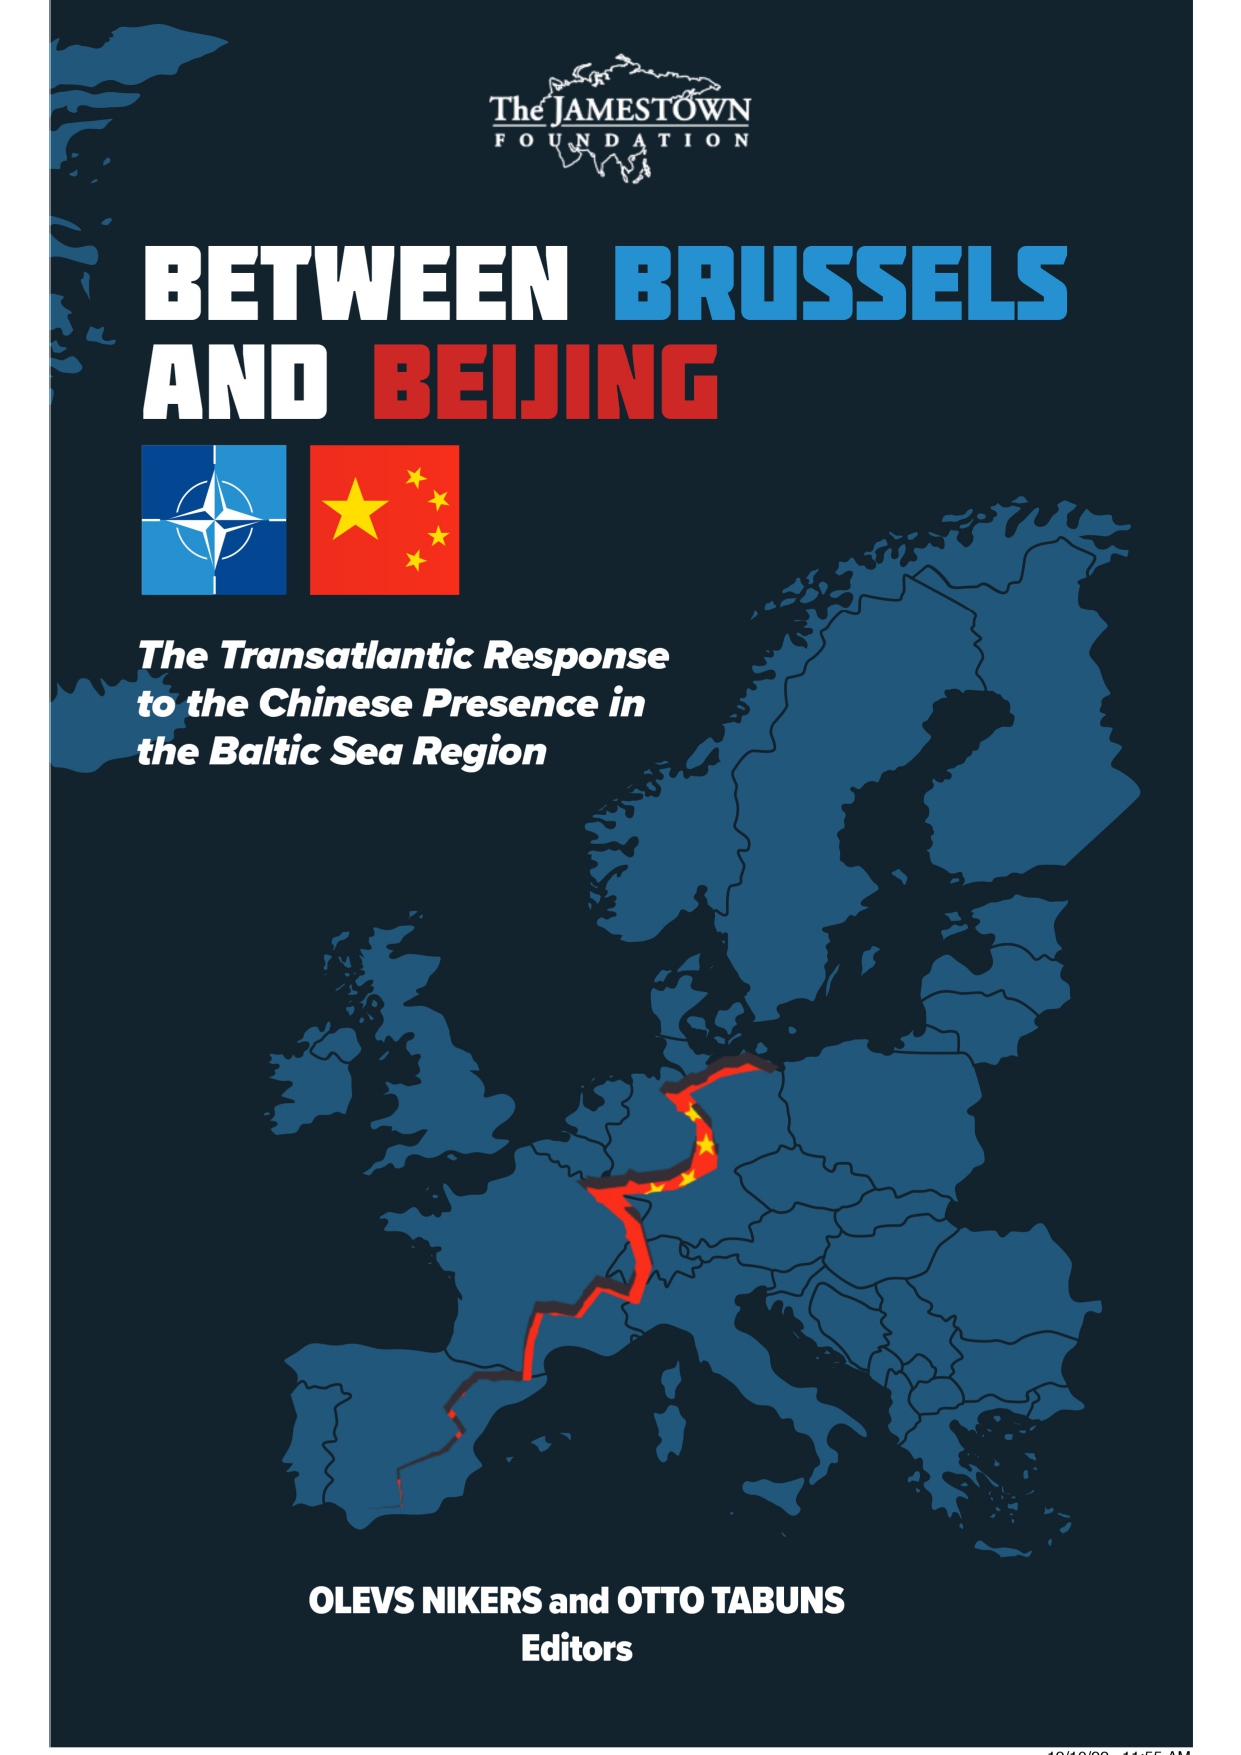 New book published: Between Brussels and Beijing: The Transatlantic Response to the Chinese Presence in the Baltic Sea Region